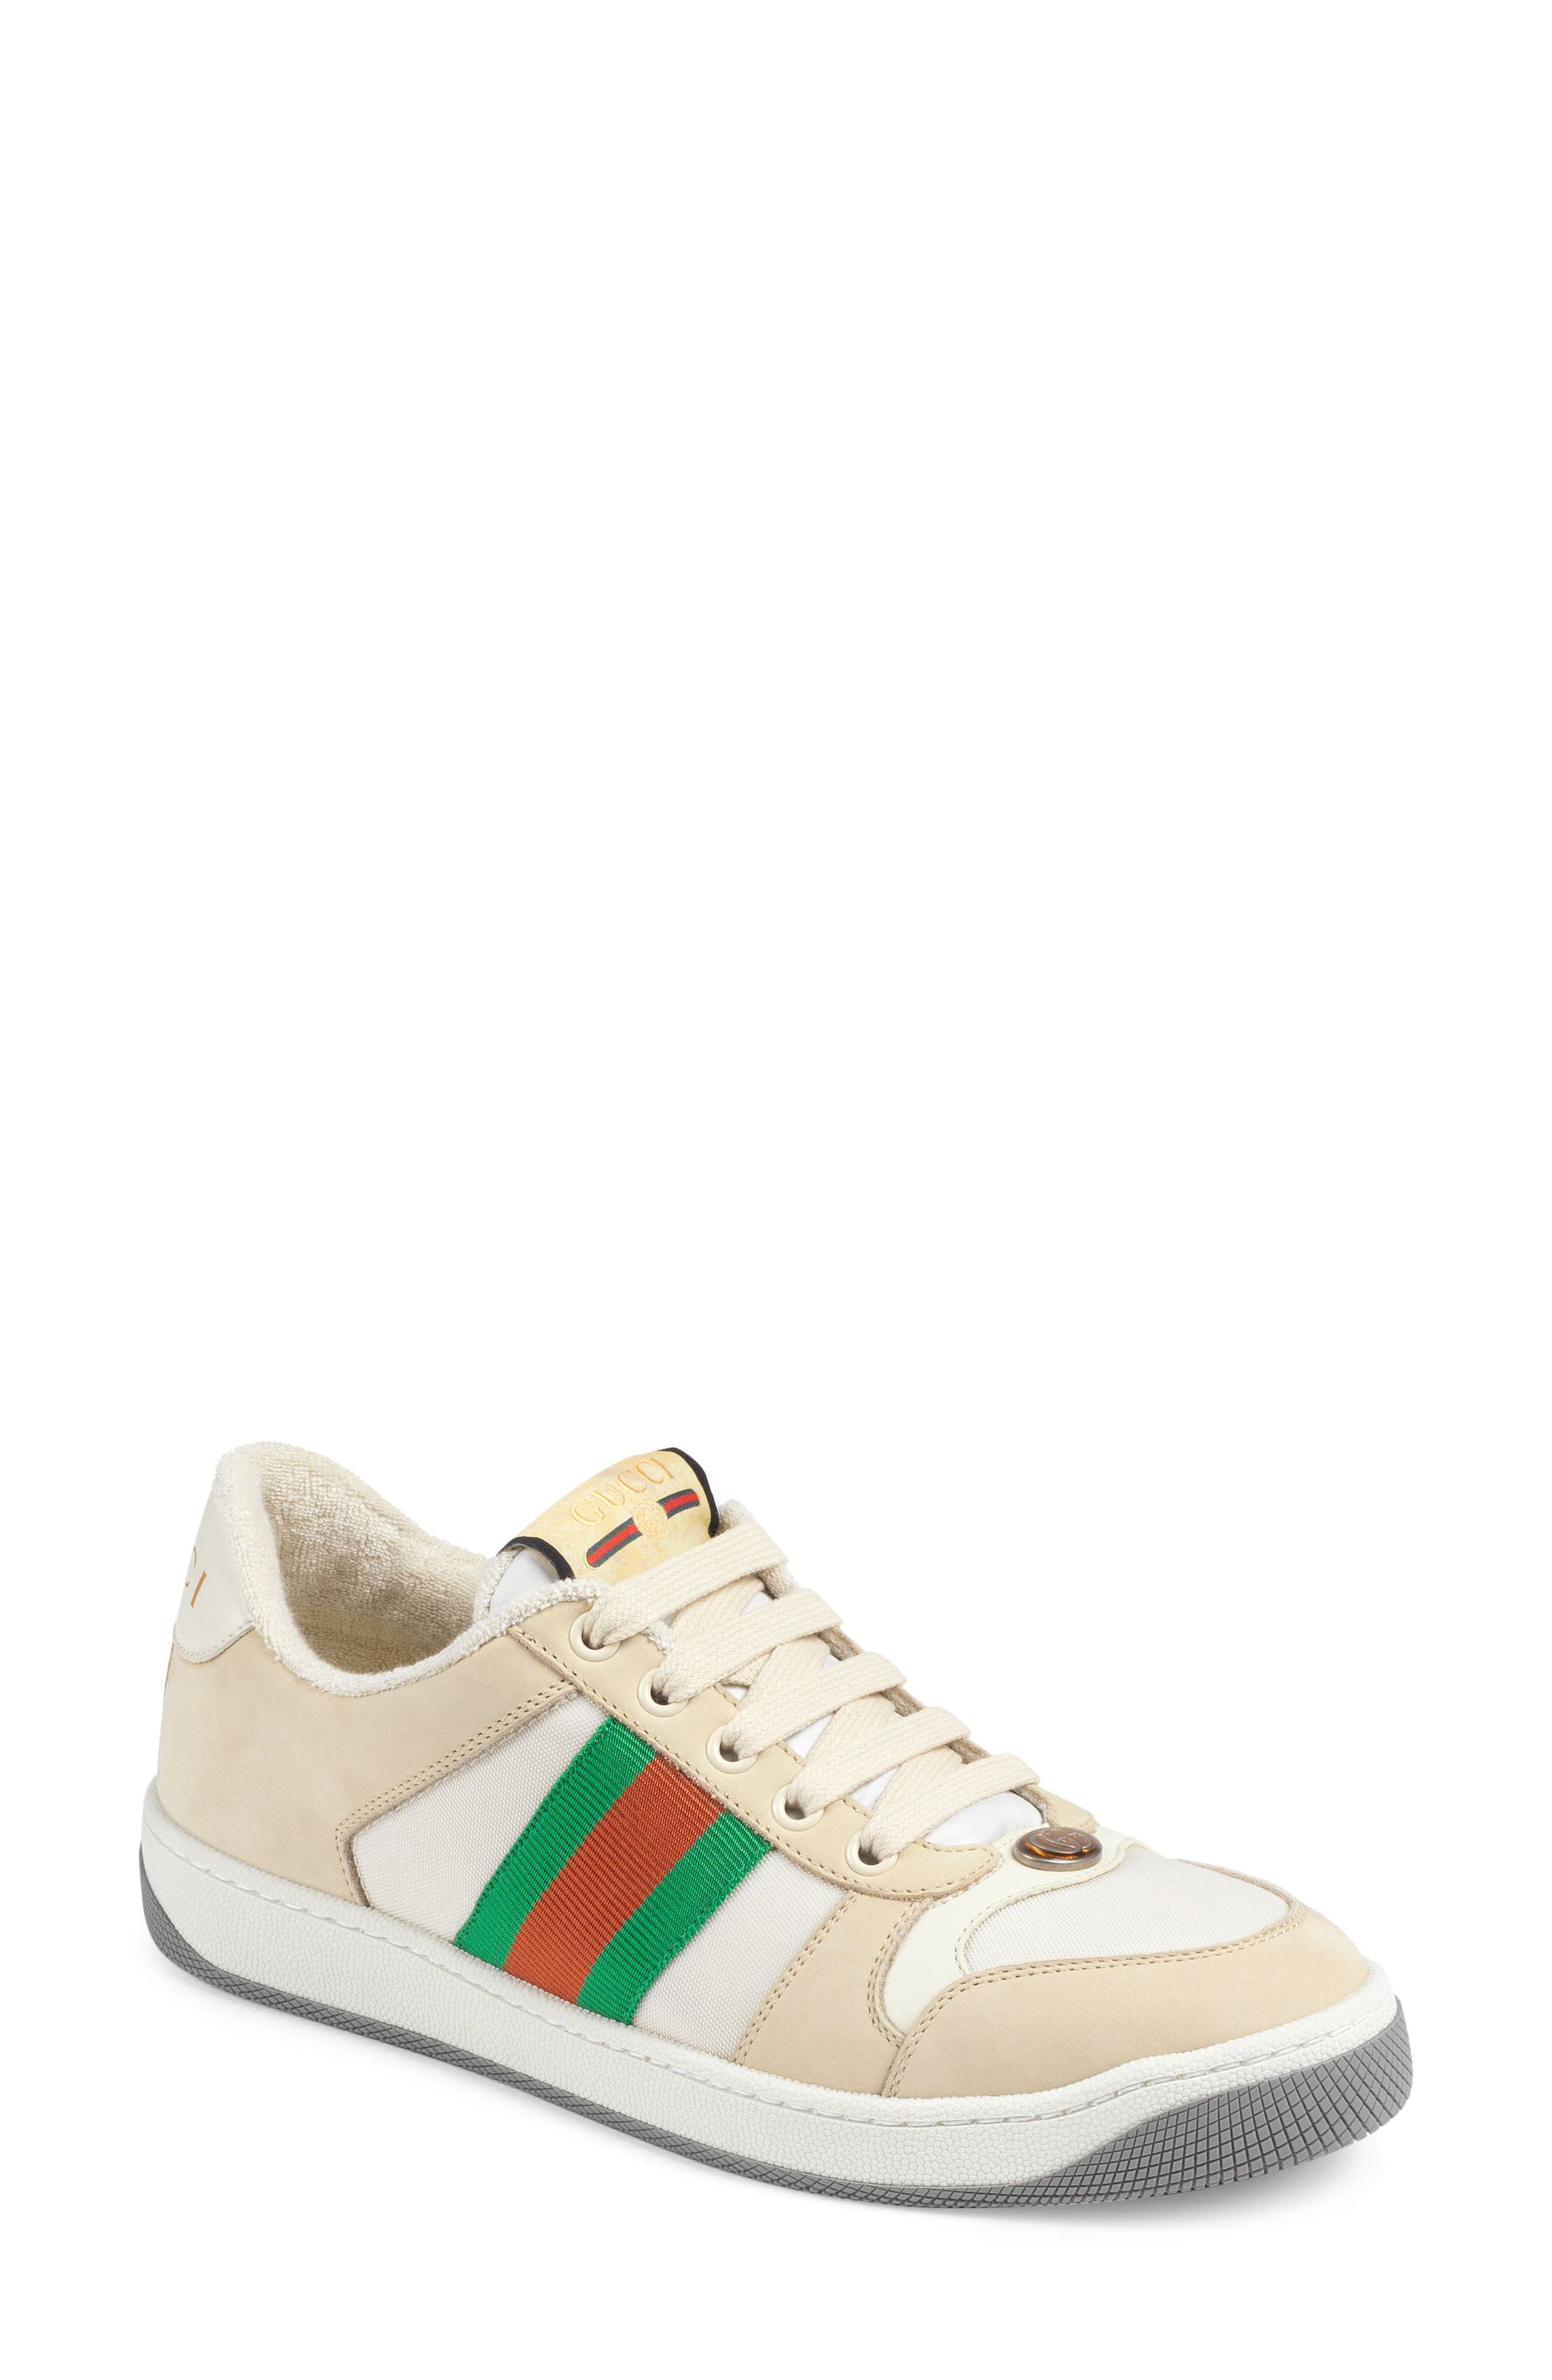 gucci white sport shoes